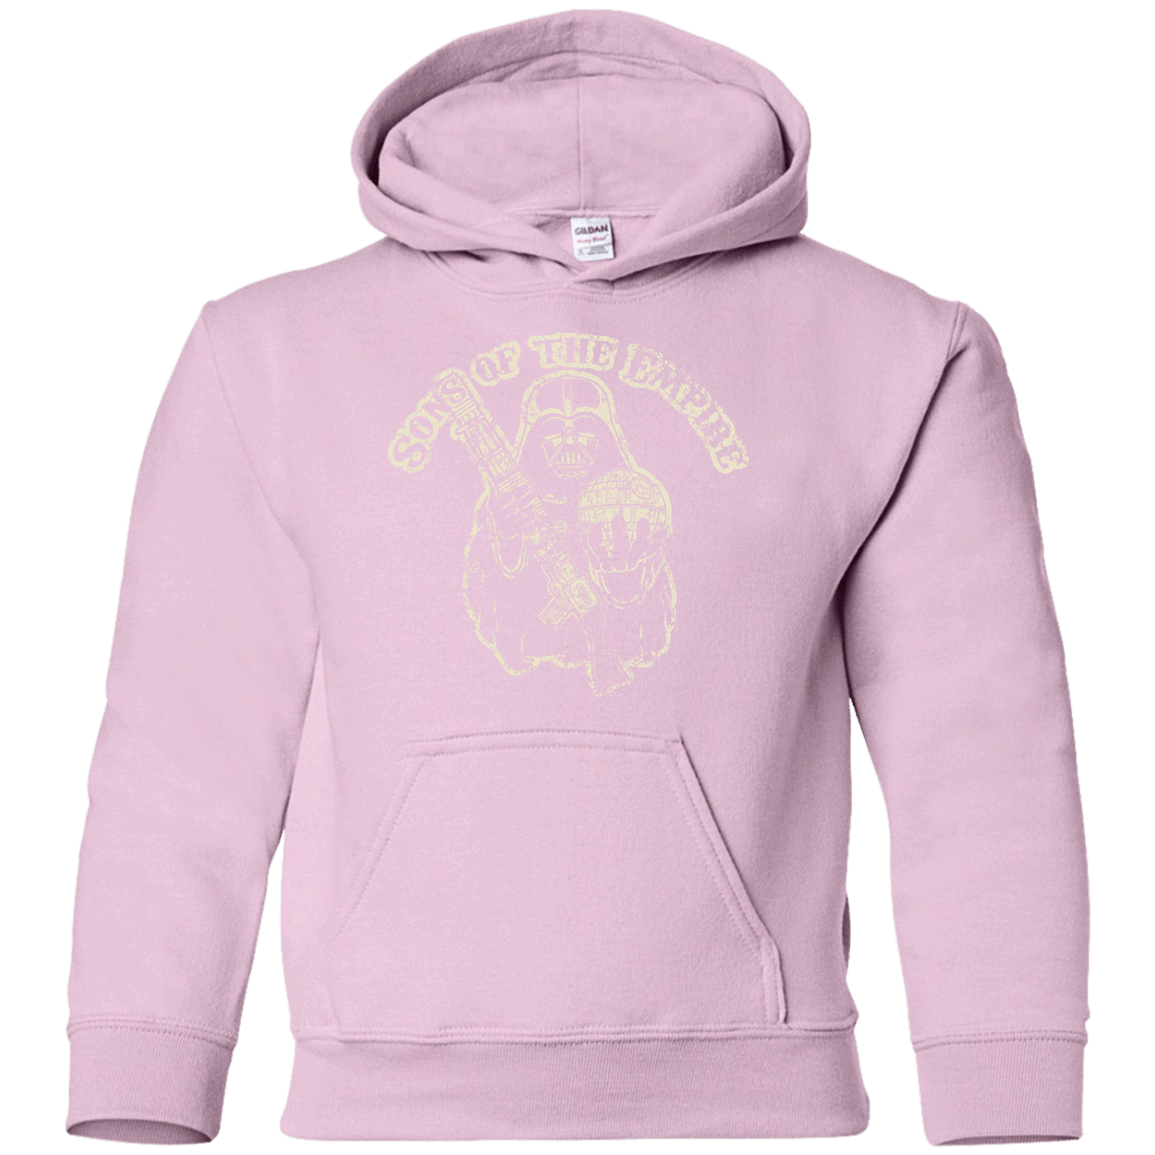 Sweatshirts Light Pink / YS Sons of the empire Youth Hoodie